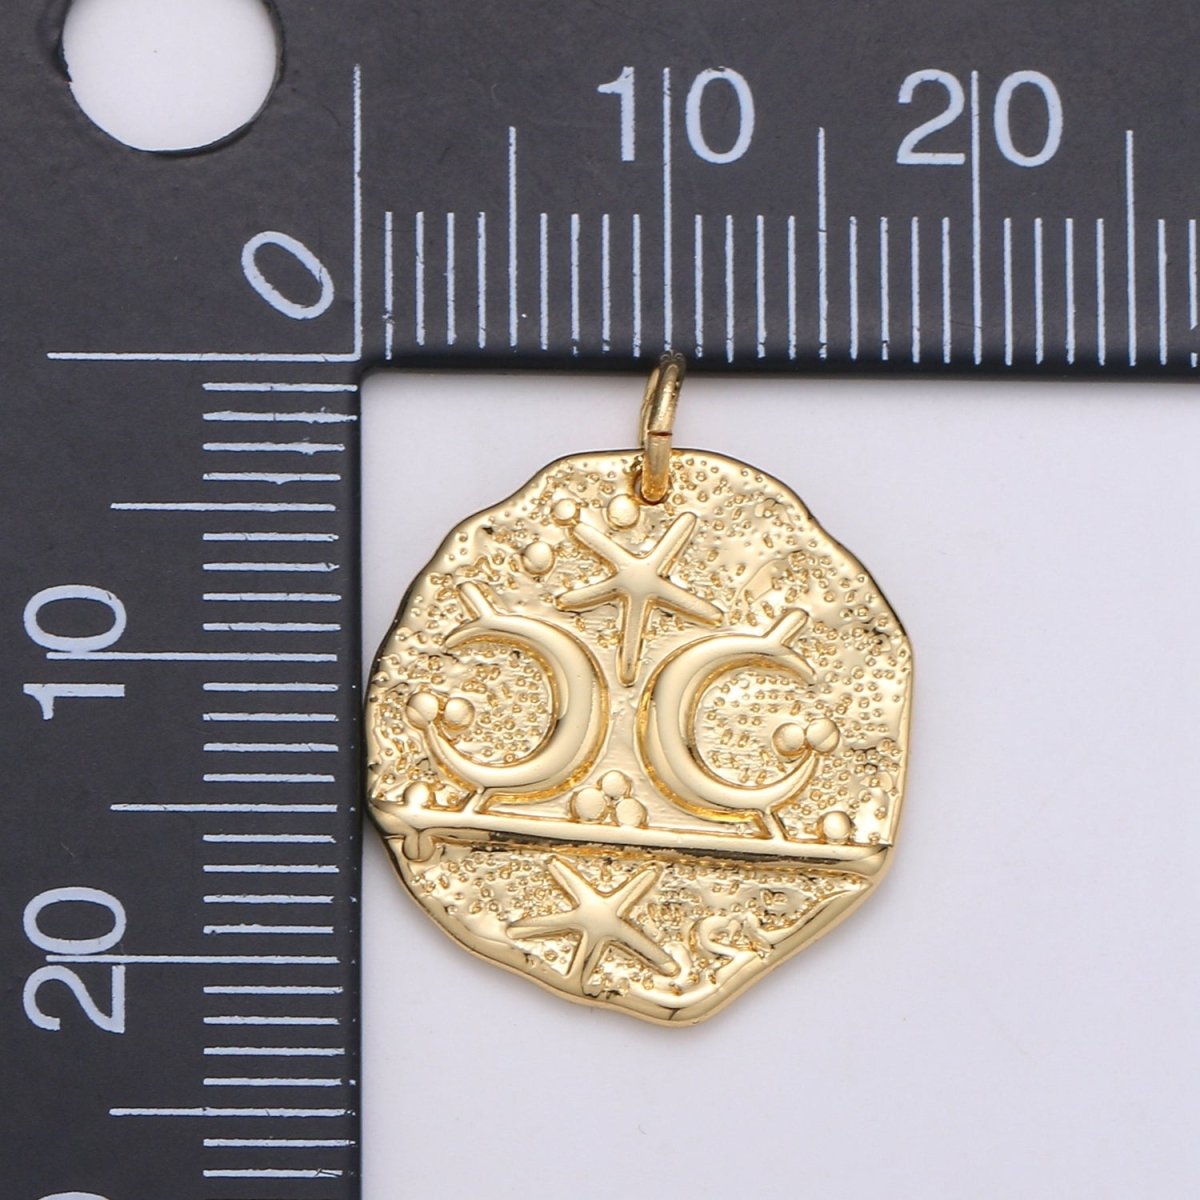 14k Gold Filled Moon and Star Medallion Pendant Celestial Astrology Round Disc Charm Pendant, Vintage Coin for Layer Necklace Earring Supply D-716 - DLUXCA